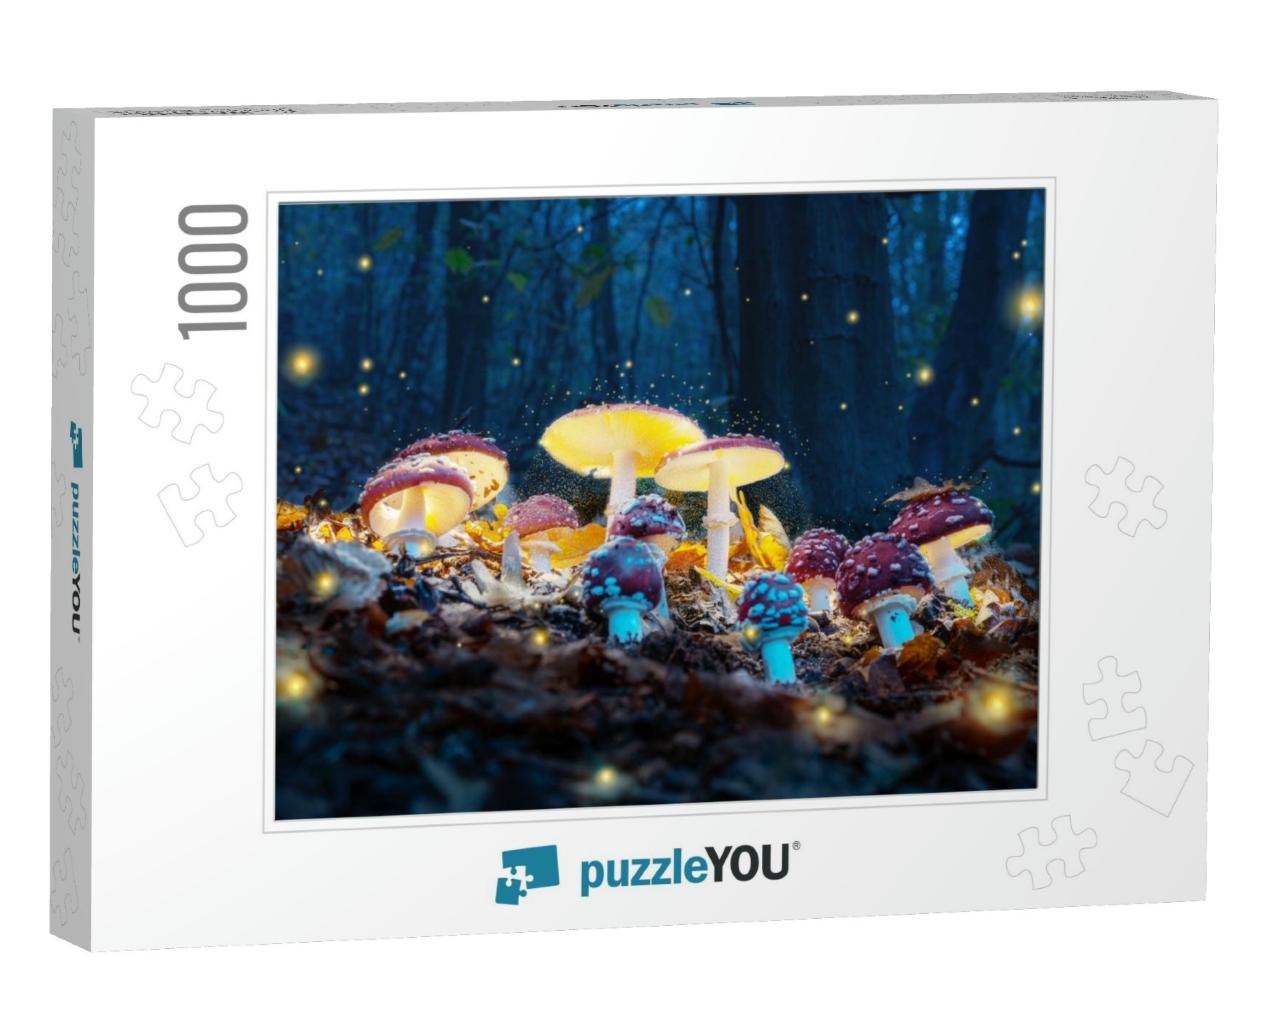 Mystical Fly Agarics Glow in a Mysterious Dark Forest. Fa... Jigsaw Puzzle with 1000 pieces